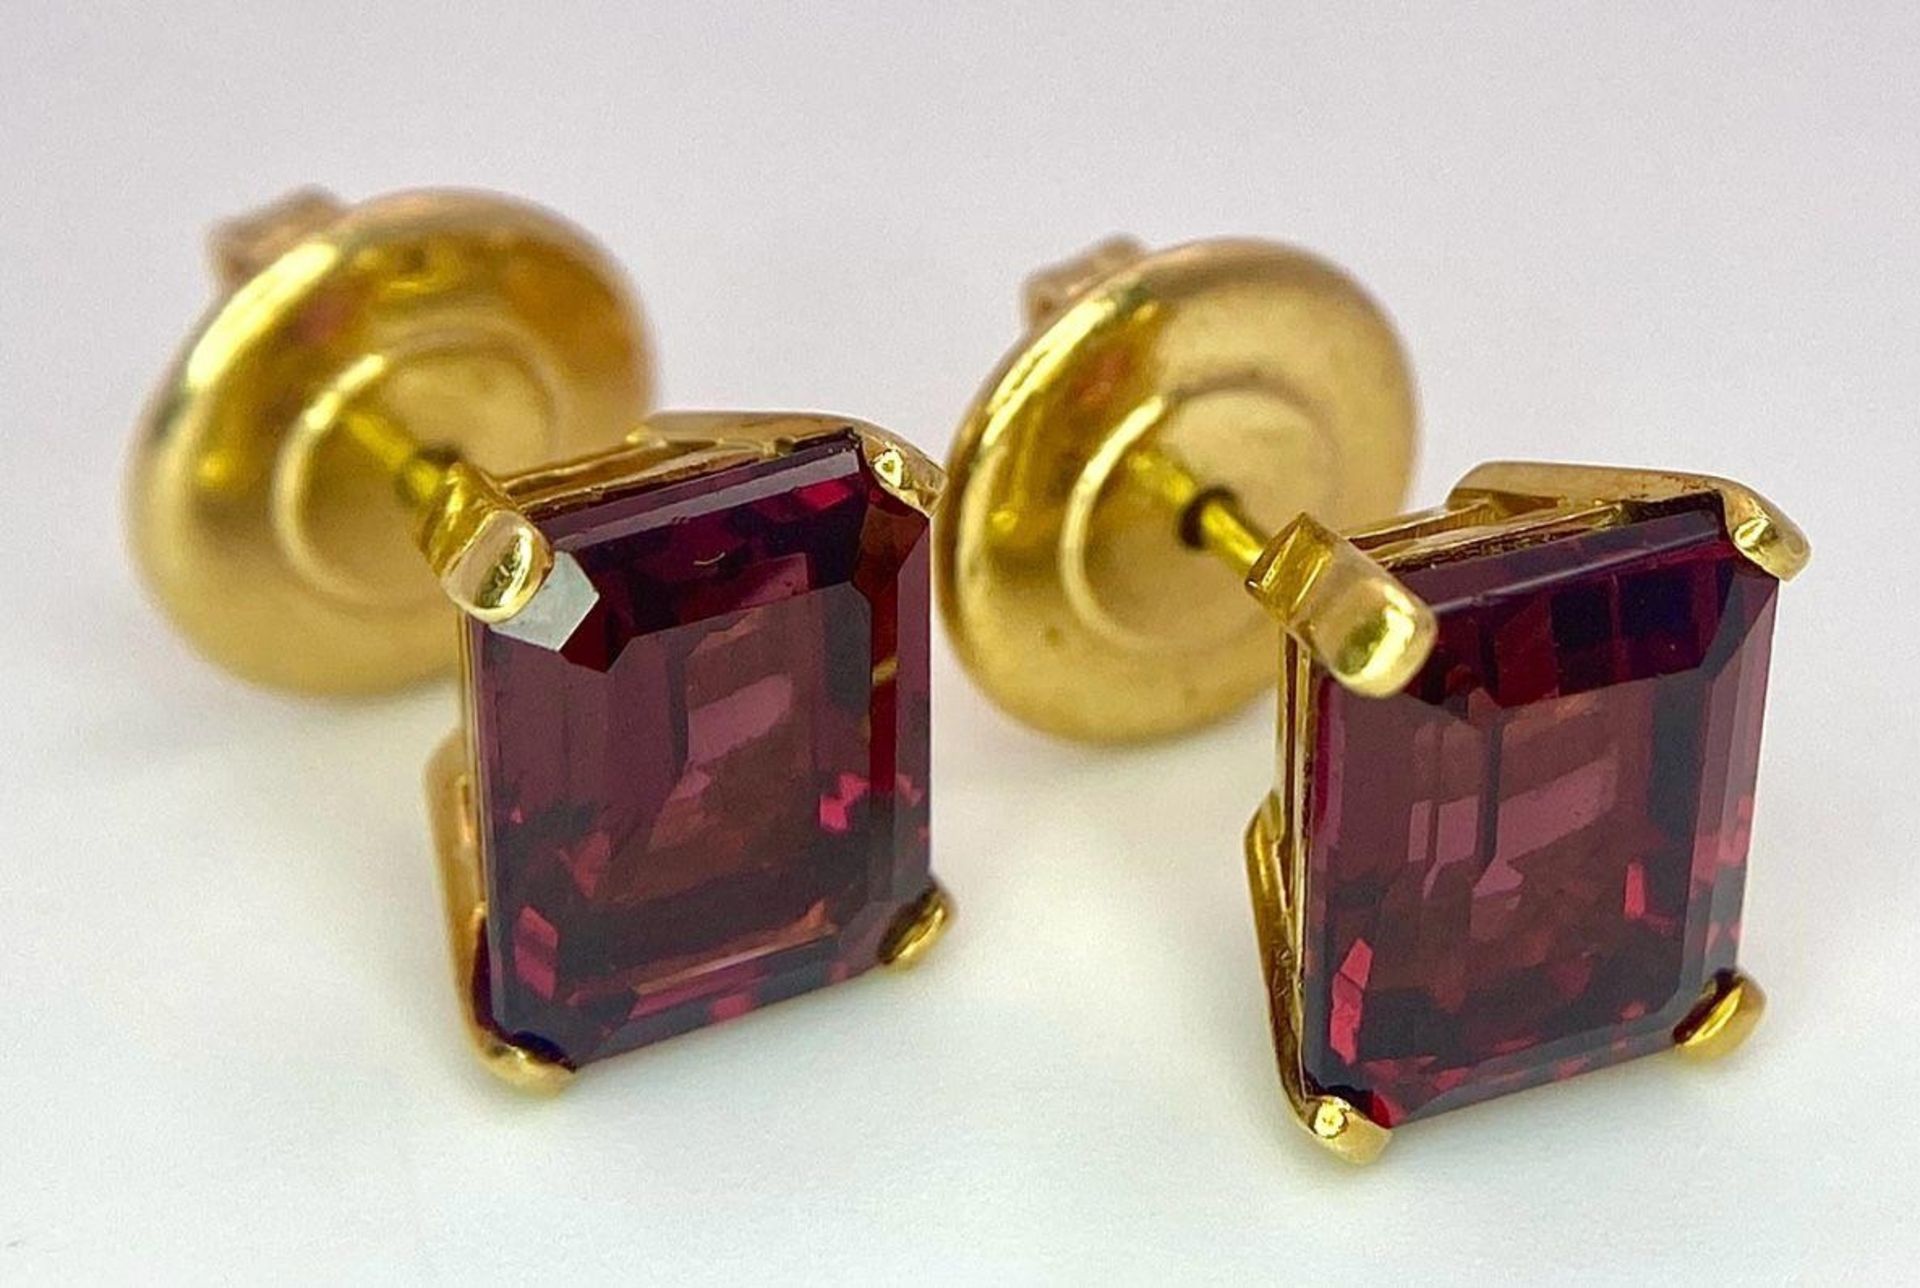 A Pair of 18K Yellow Gold and Alexandrite Earrings. Emerald cut alexandrite - 5ctw. 5.7g total - Image 3 of 8